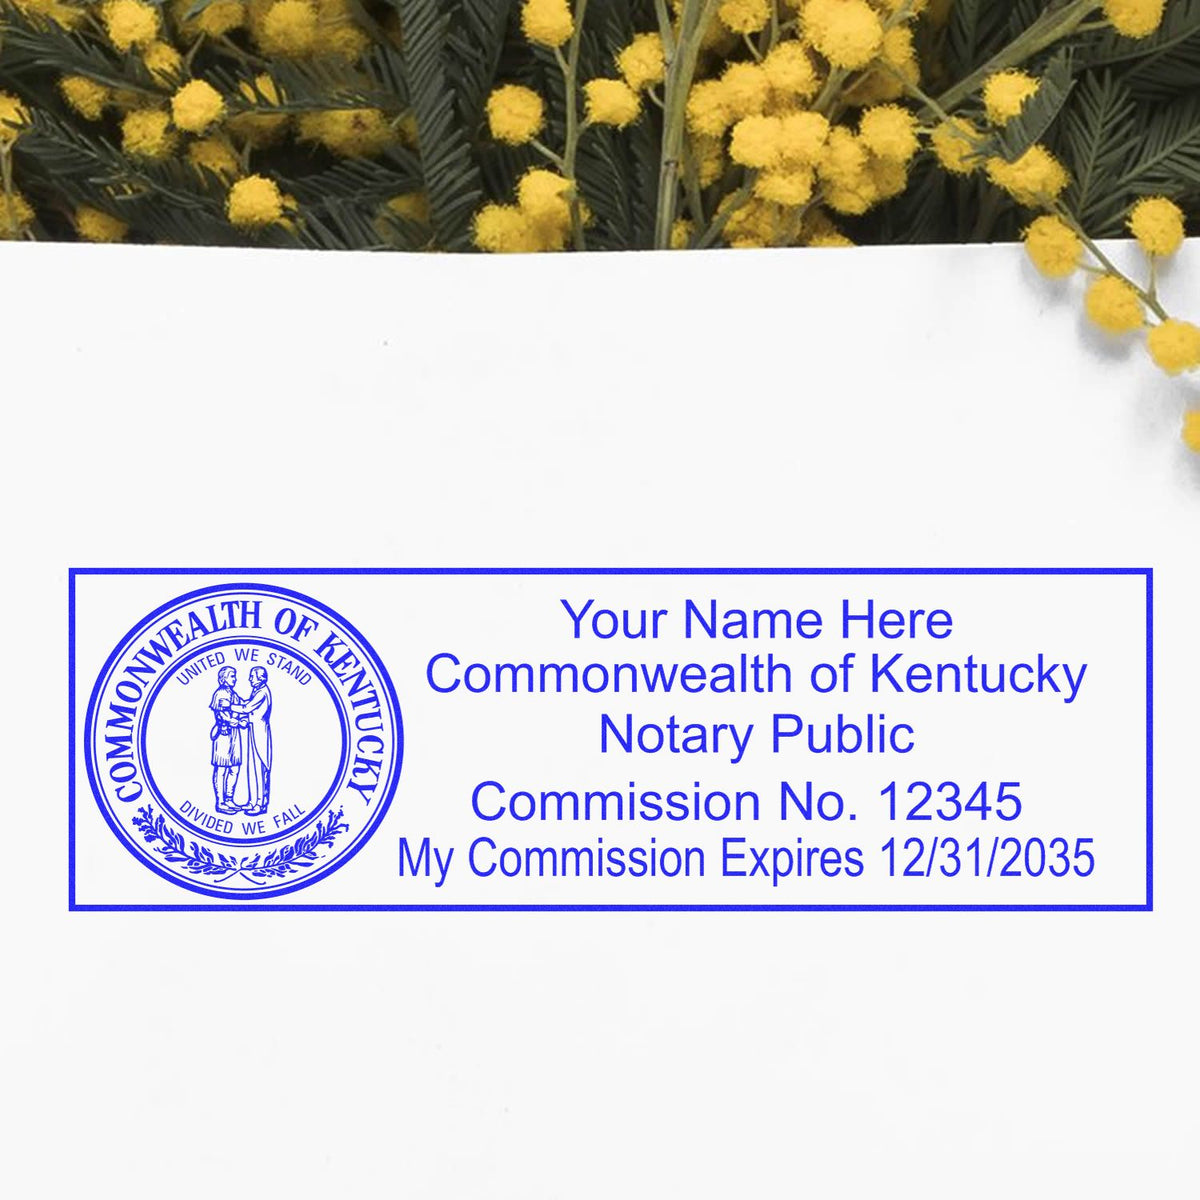 A lifestyle photo showing a stamped image of the Wooden Handle Kentucky State Seal Notary Public Stamp on a piece of paper